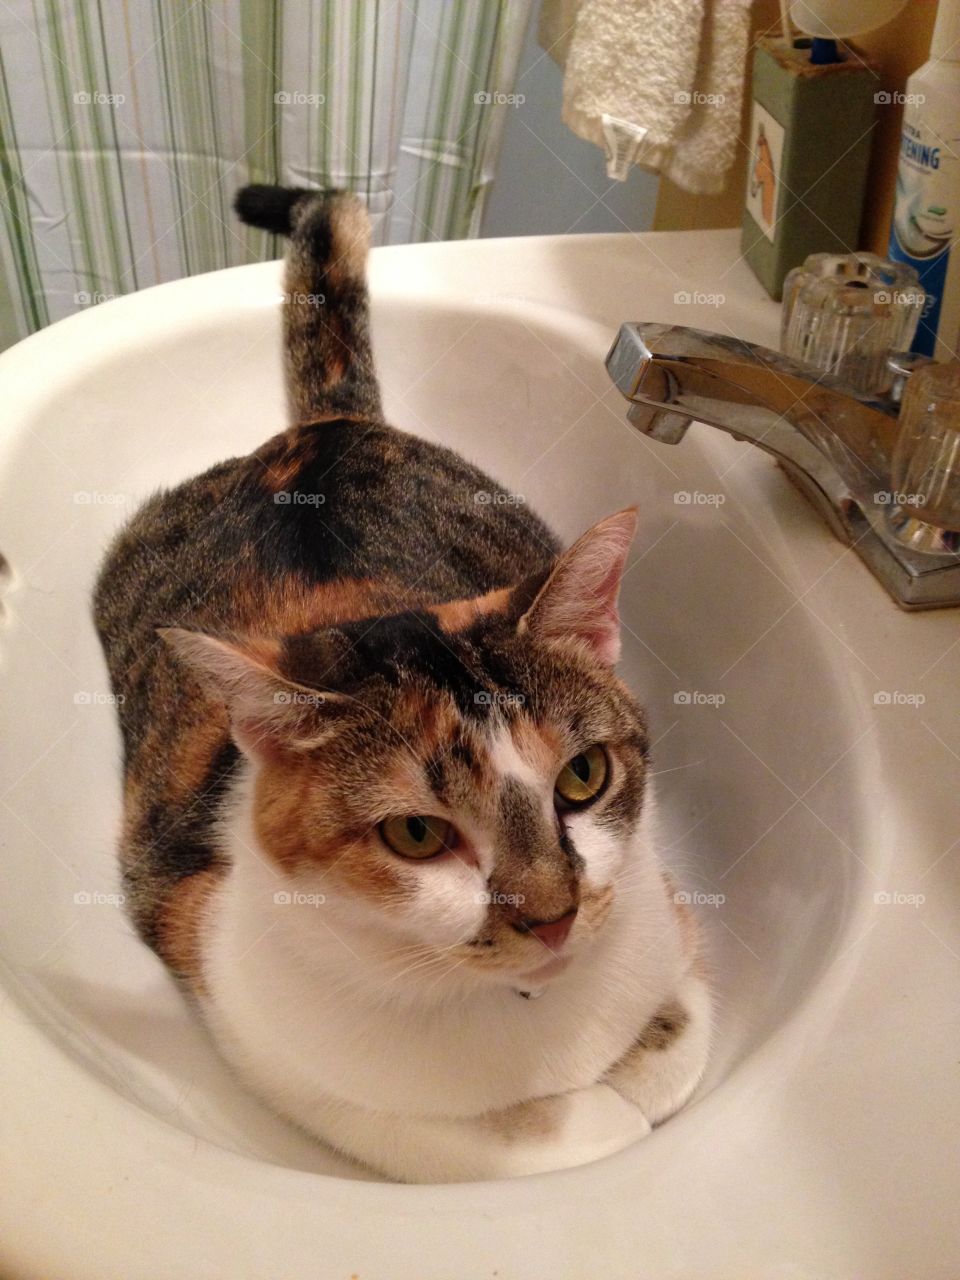 Paisley in the sink